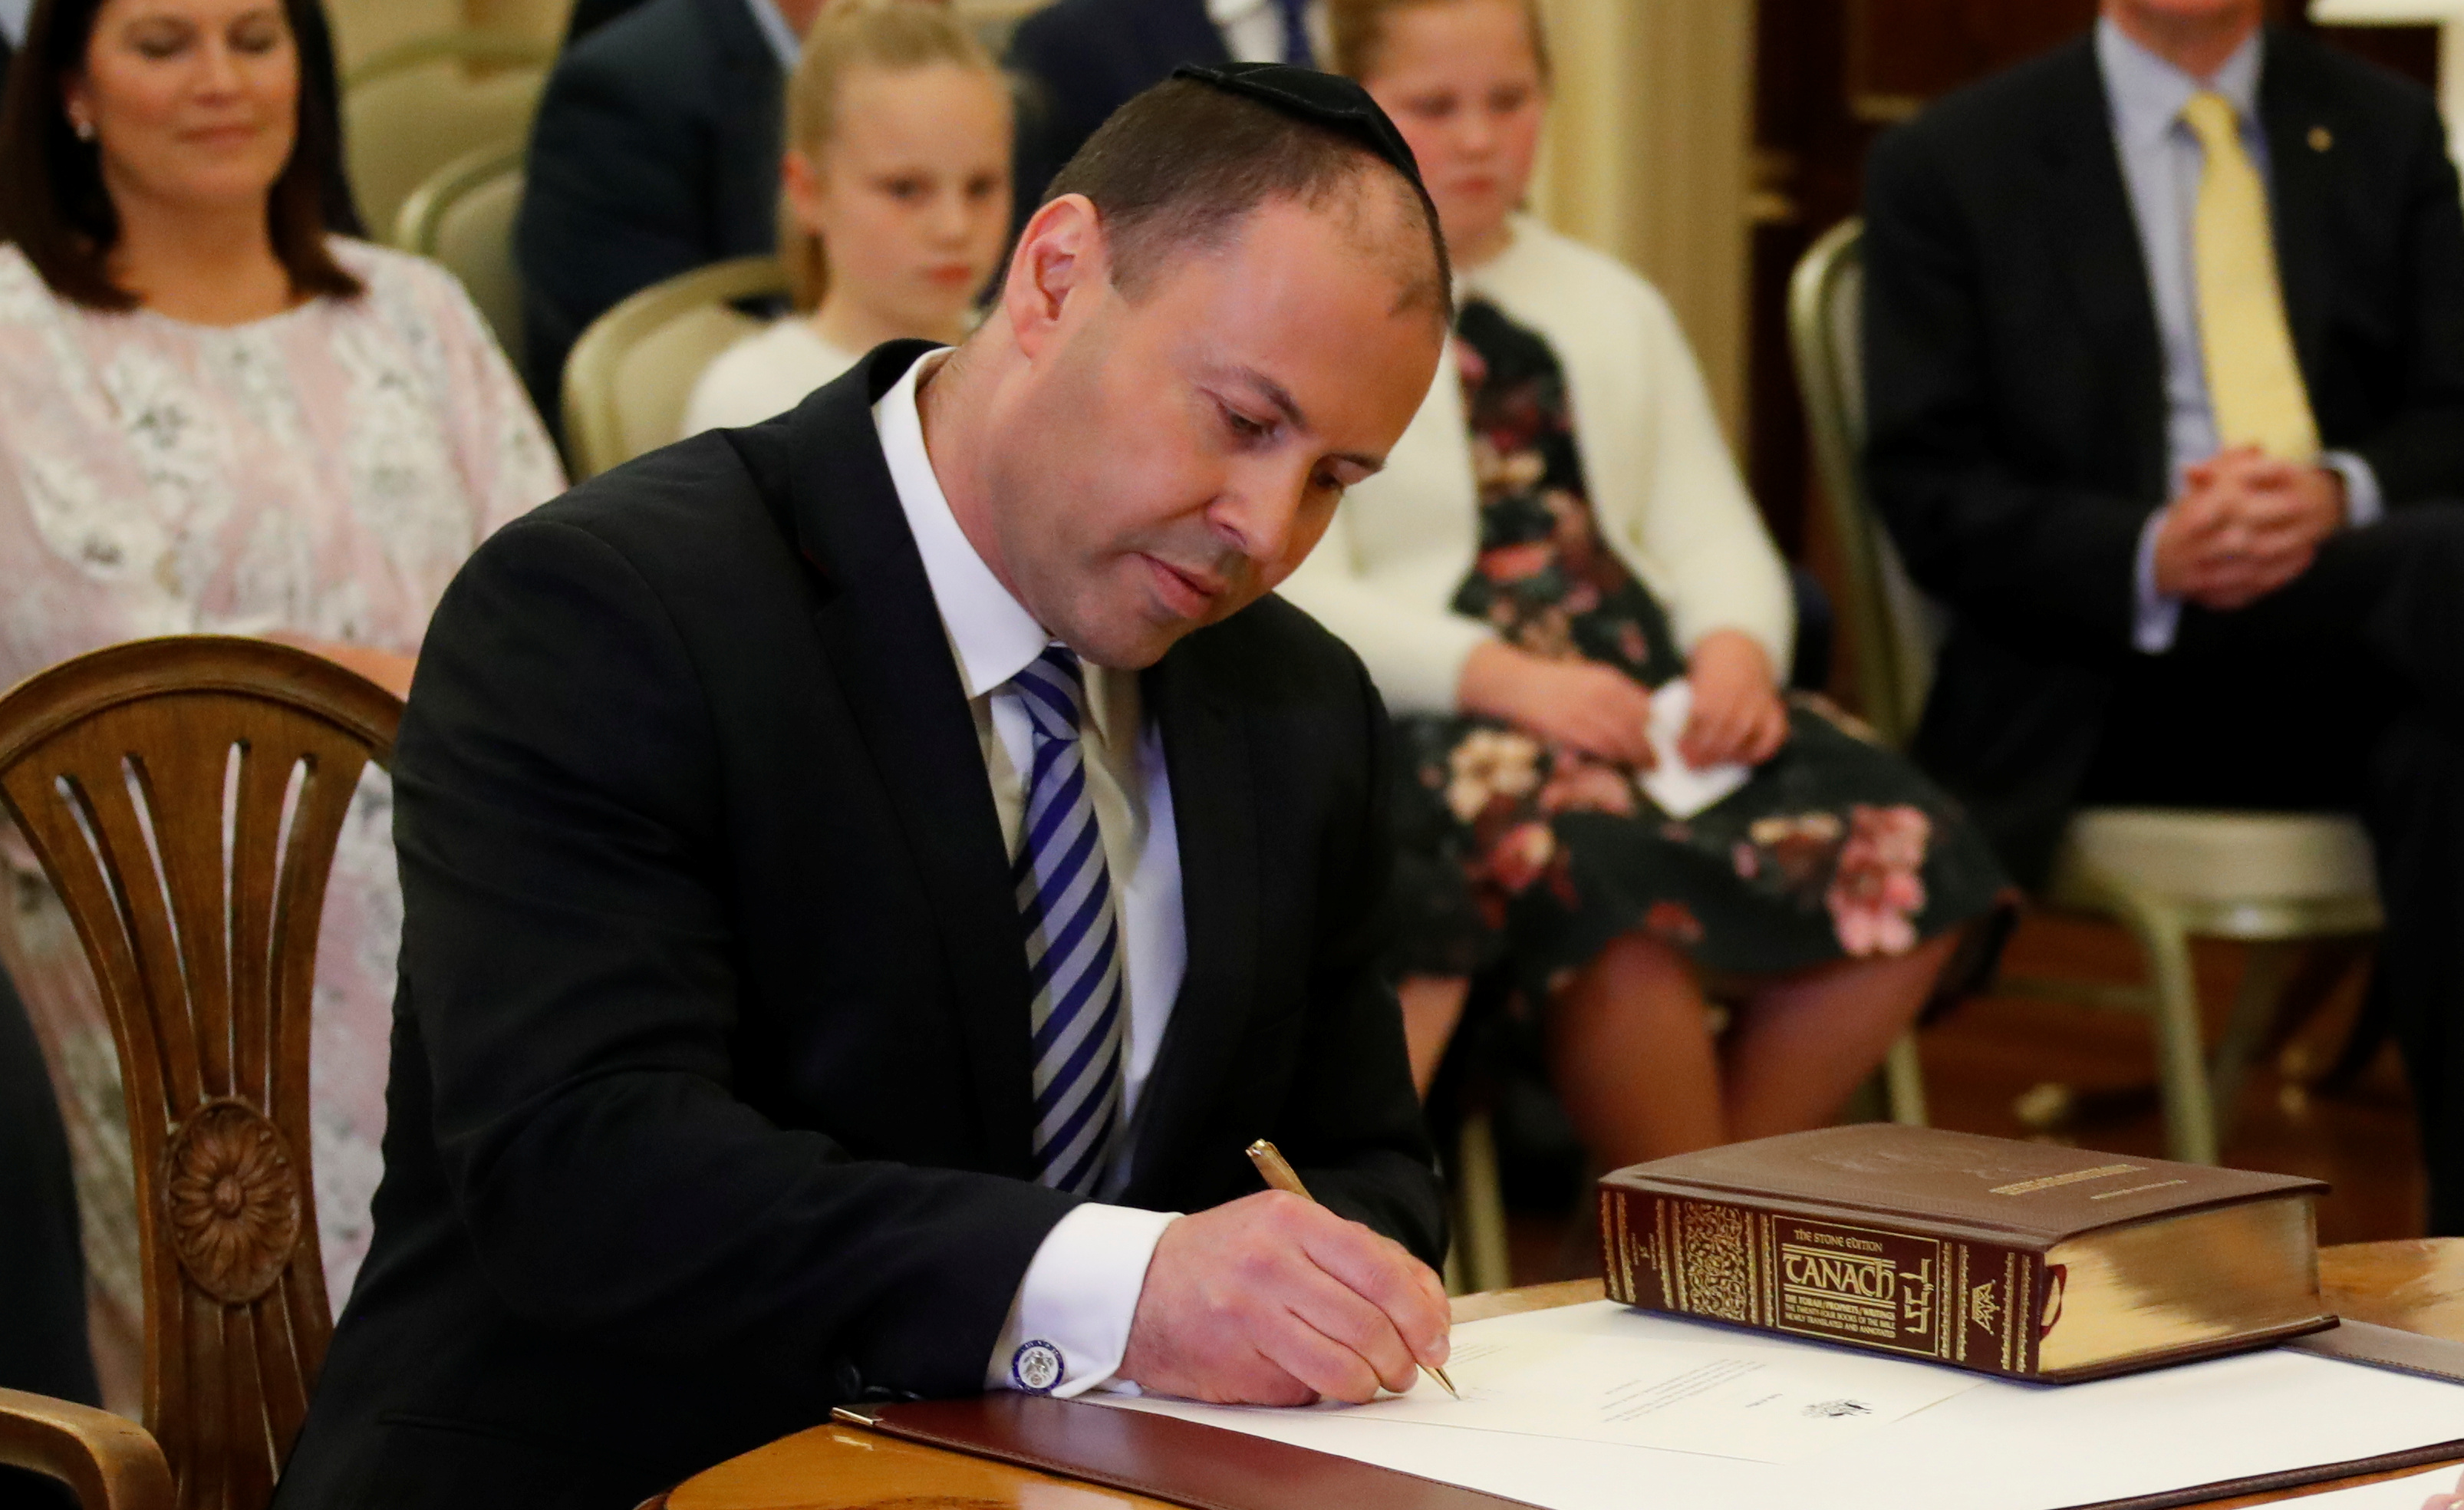 The new Treasurer Josh Frydenberg attends the swearing-in ceremony in Canberra